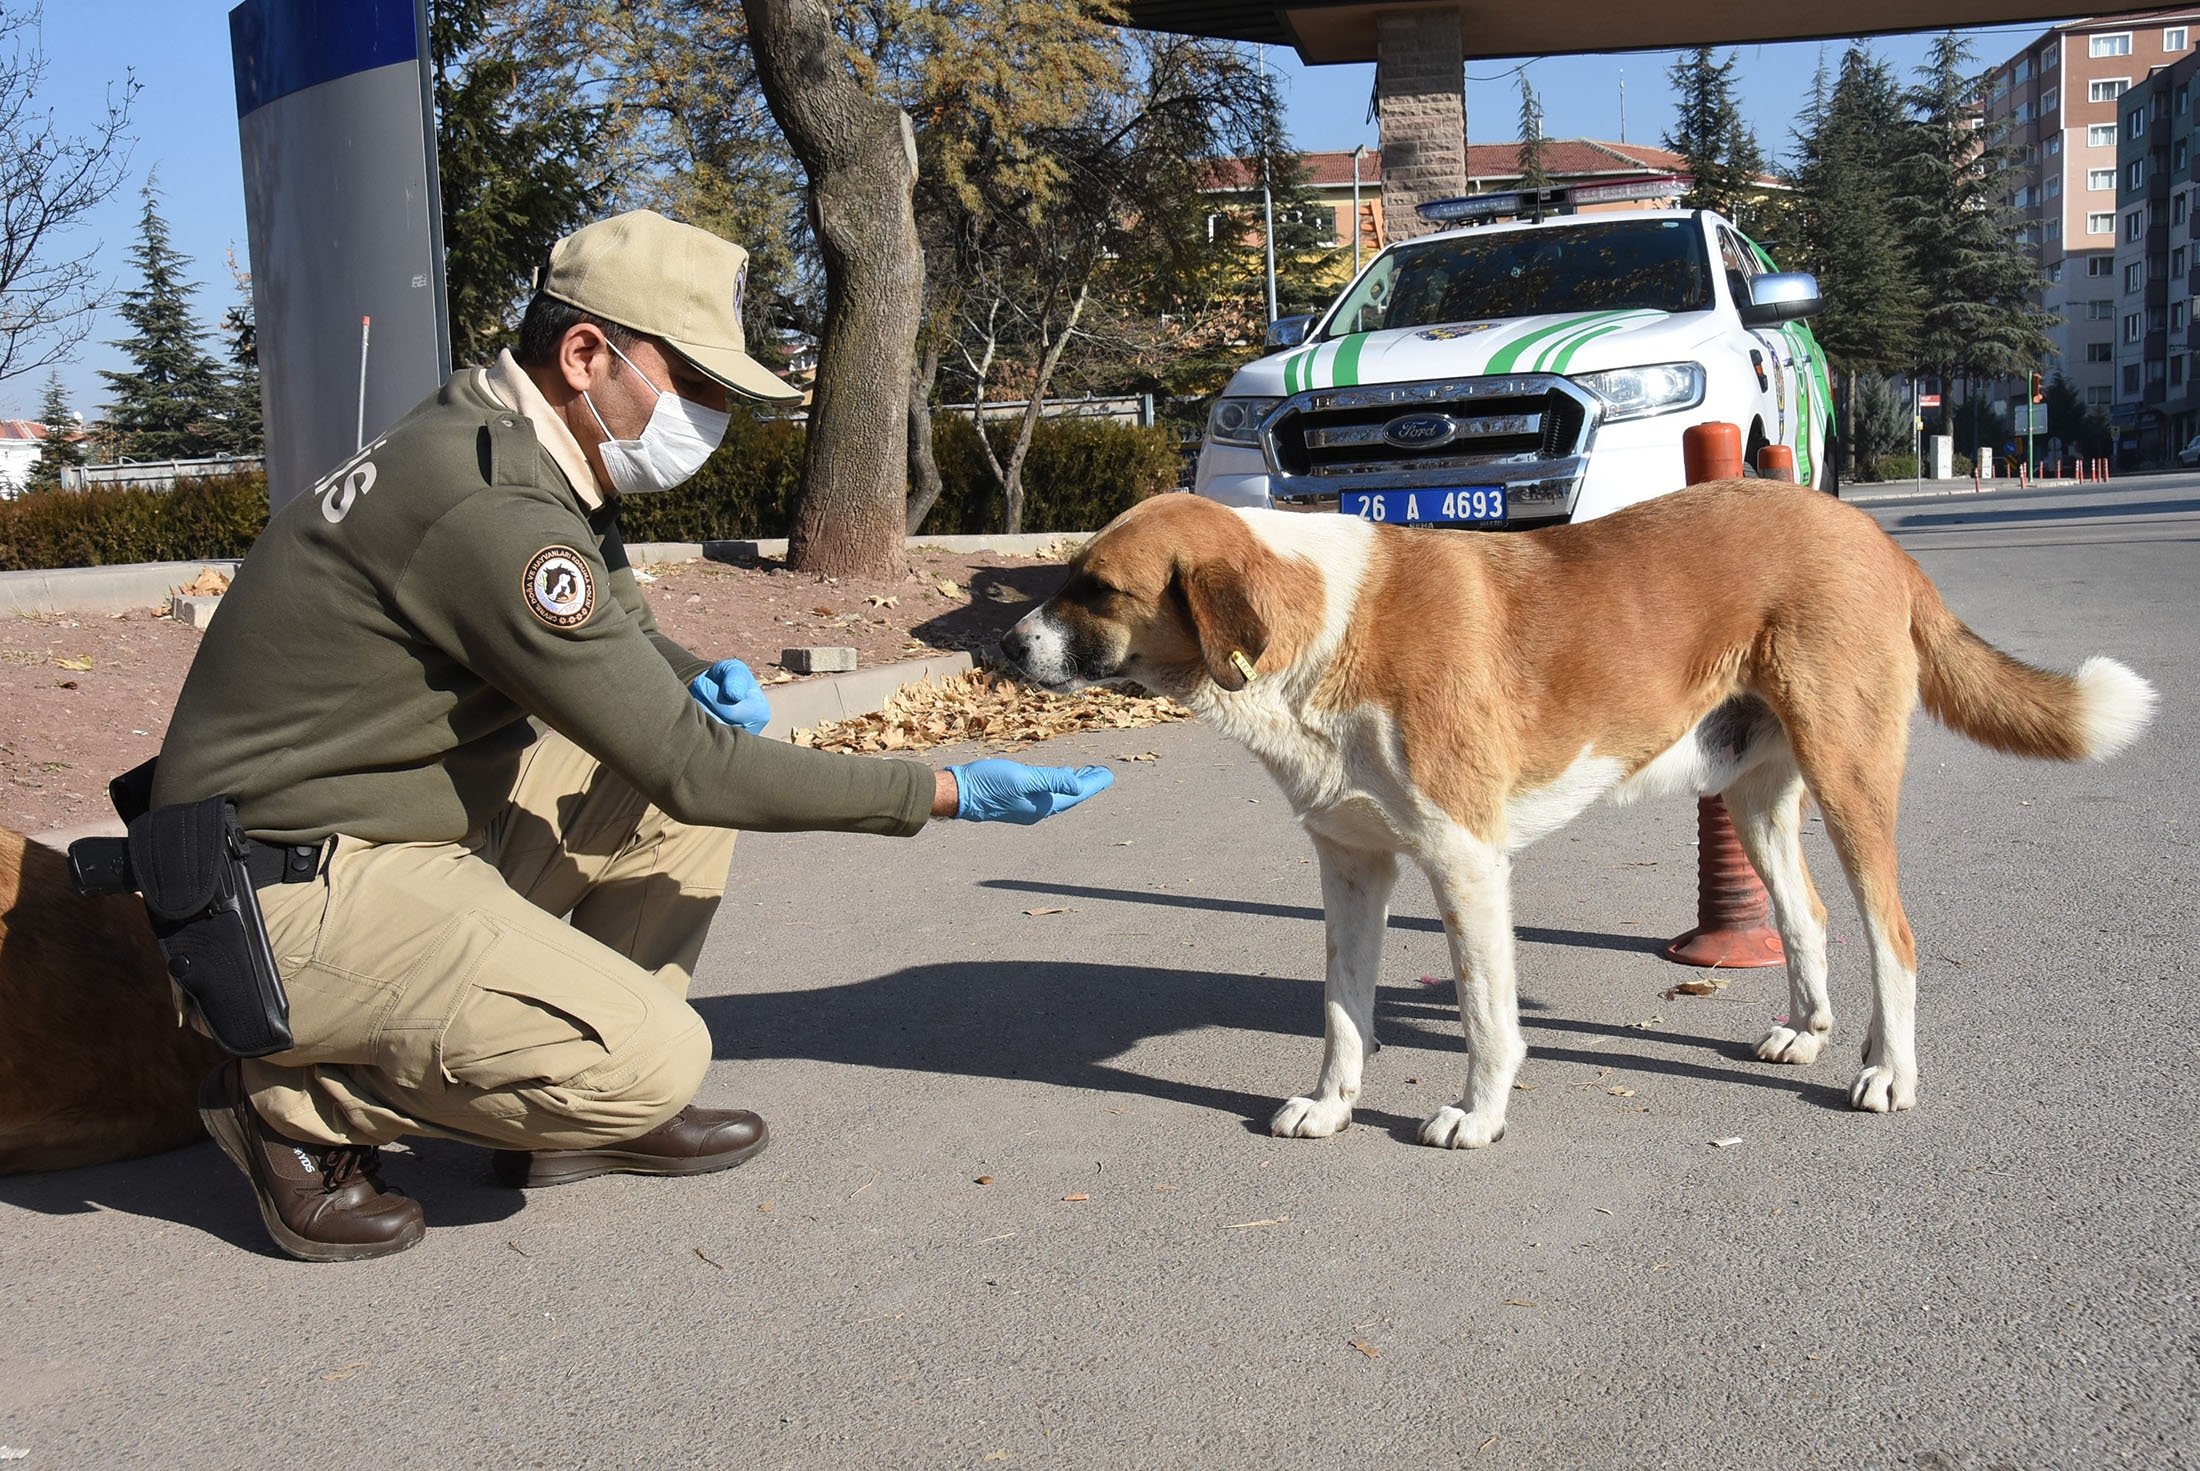 In photos: Turkey takes care of stray animals amid lockdown | Daily Sabah